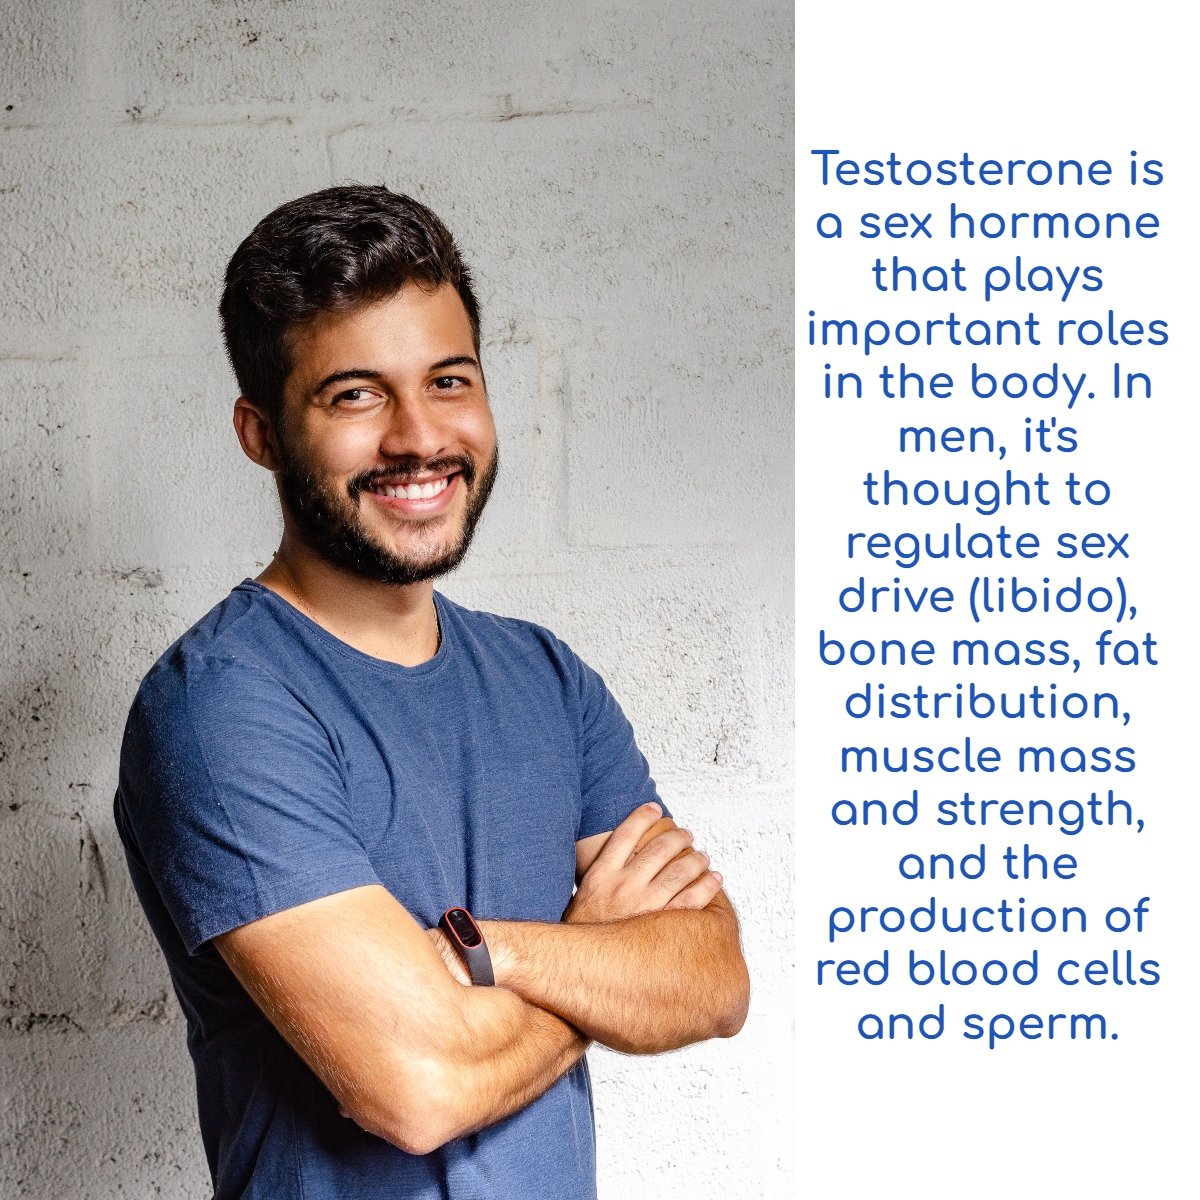 testosterone is an important hormone